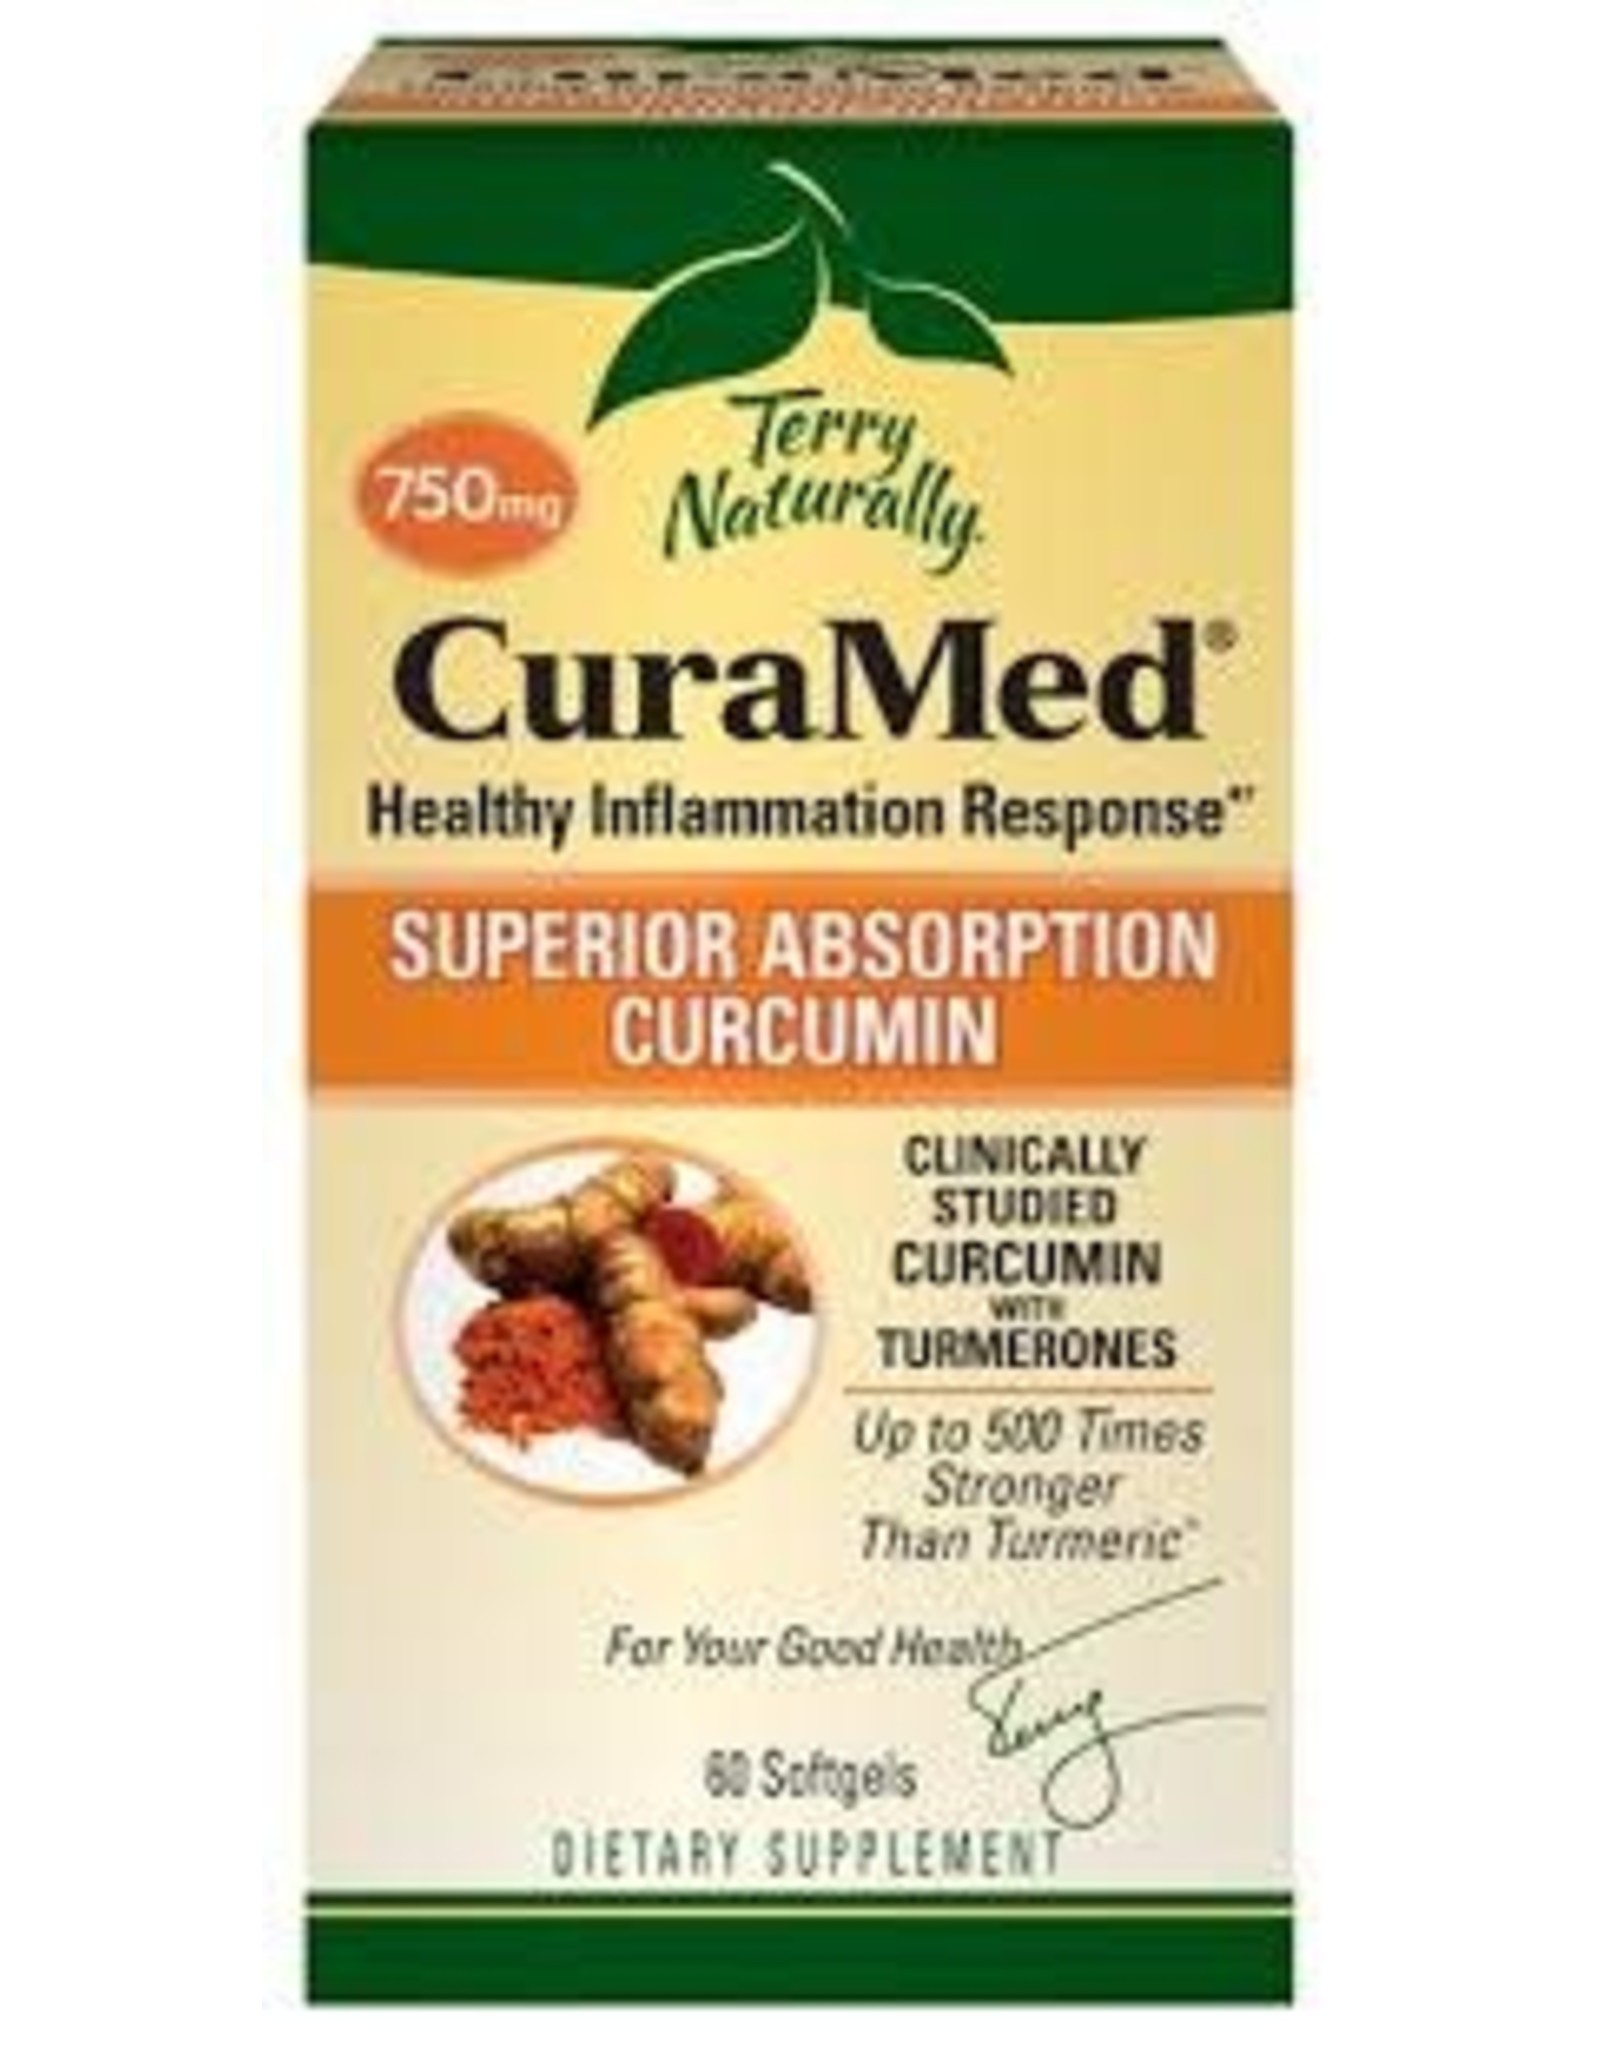 Terry Naturally Terry Naturally Curamed 750mg